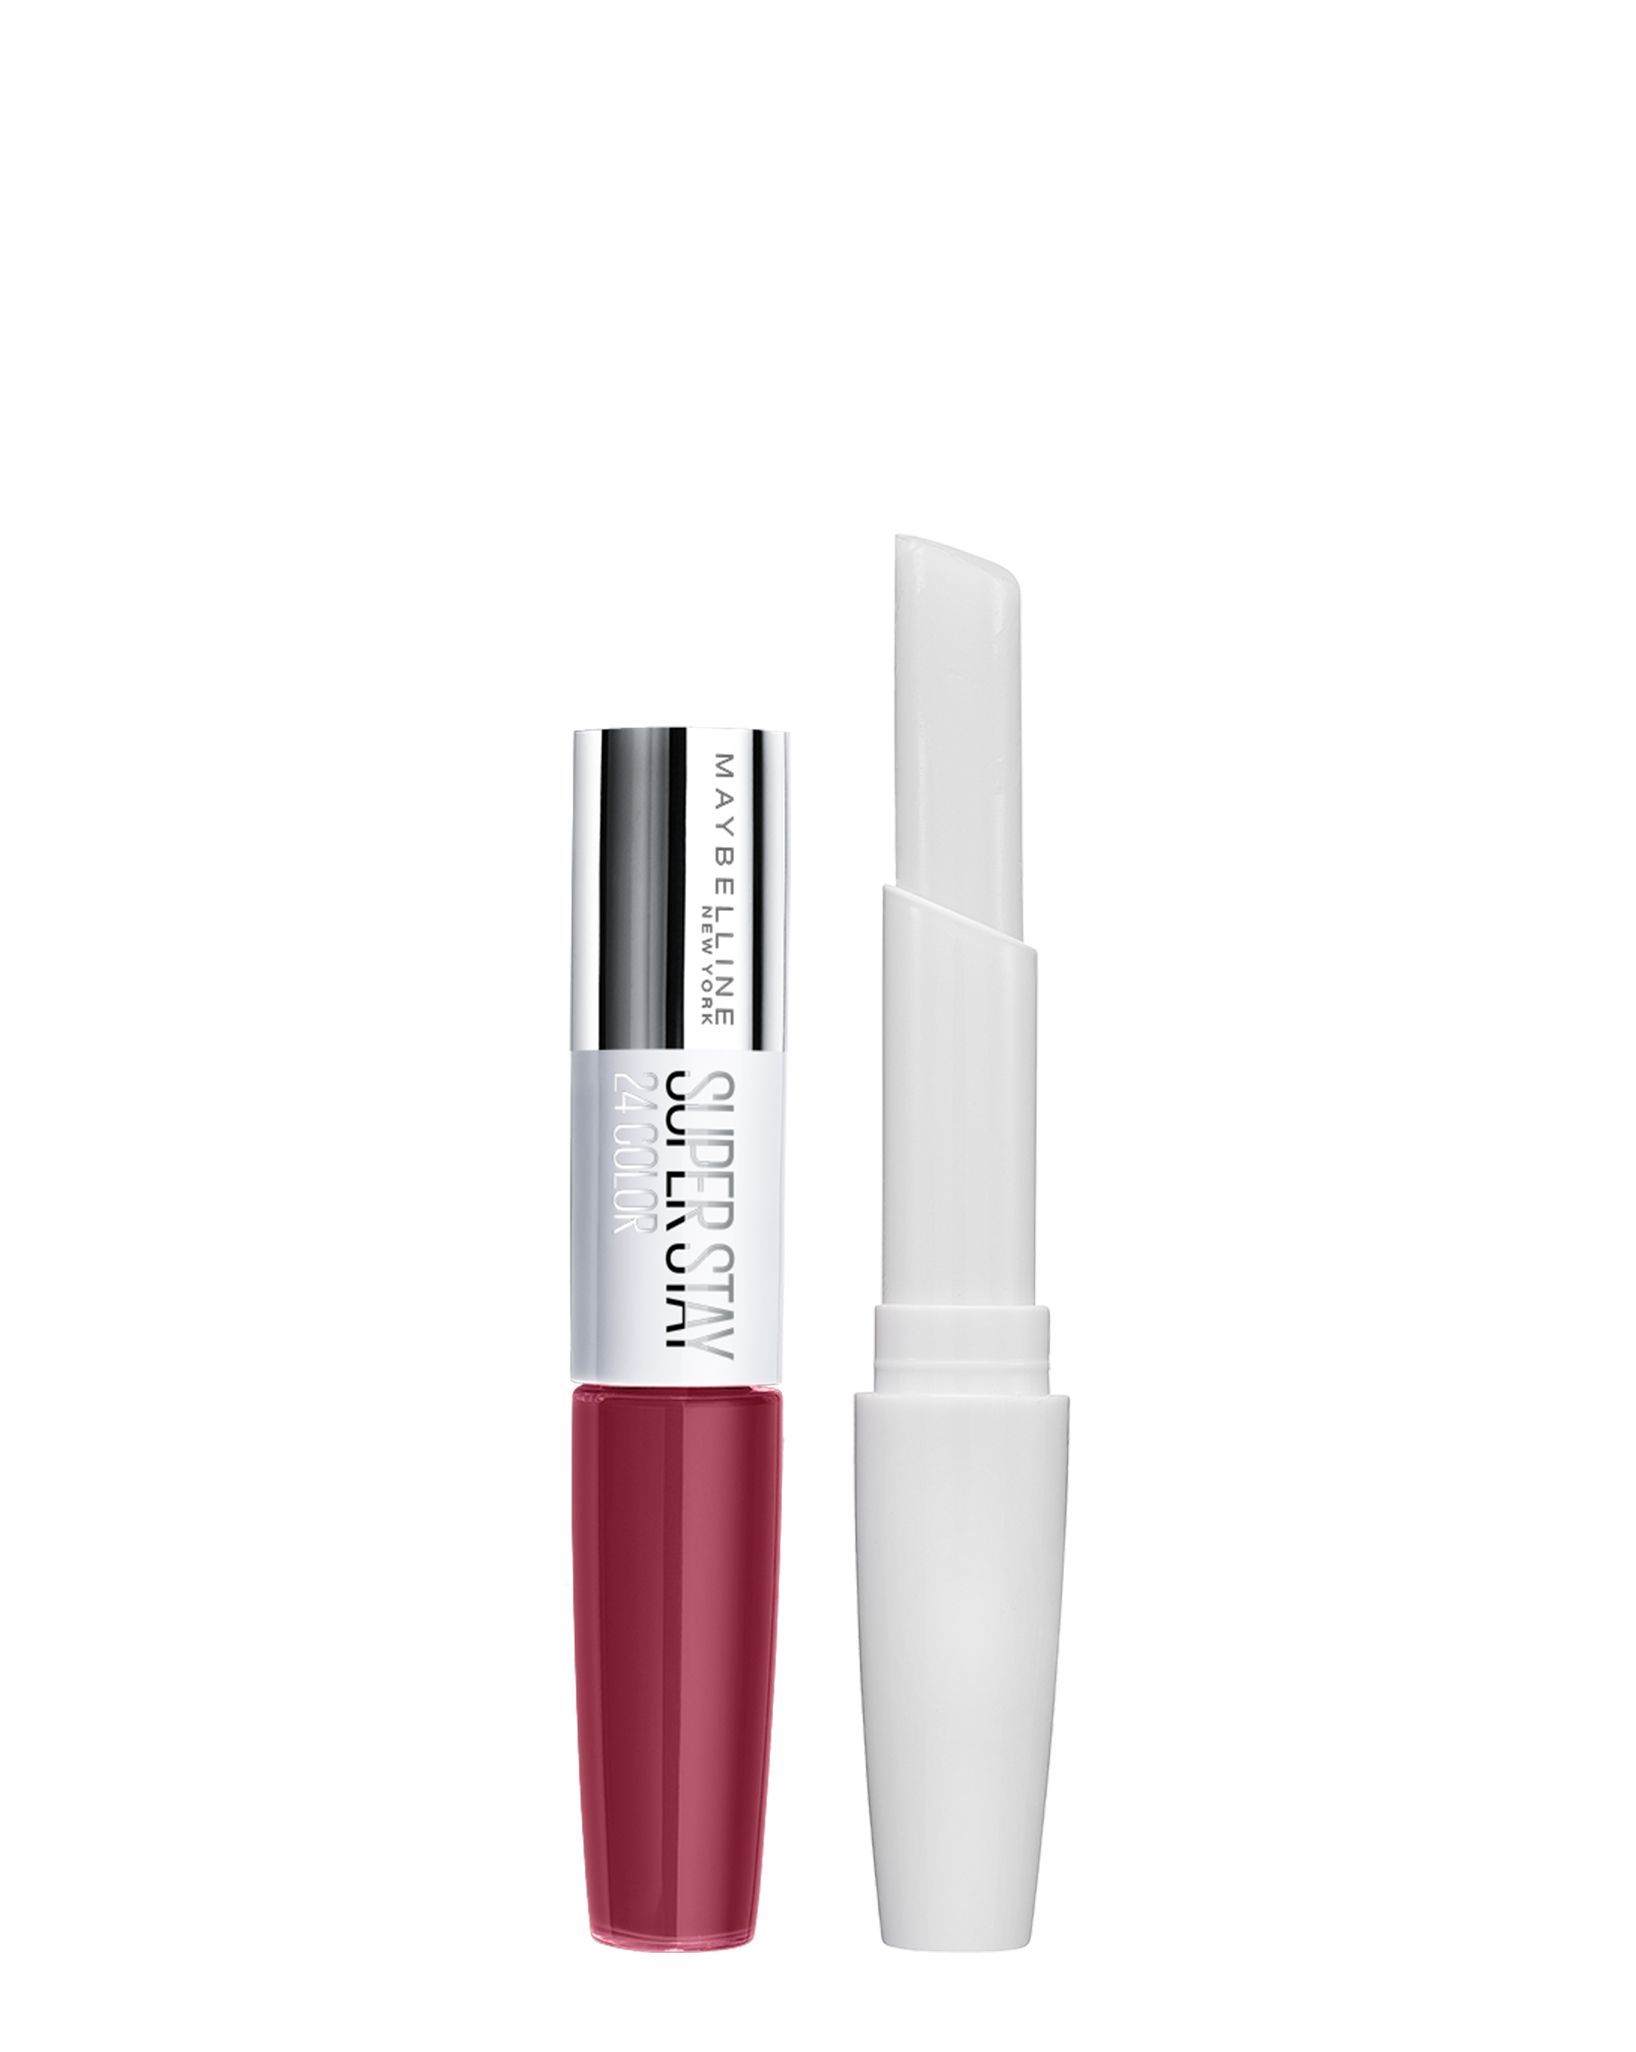 Labios Superstay 24H 195 MAYBELLINE, pack 1 unid.